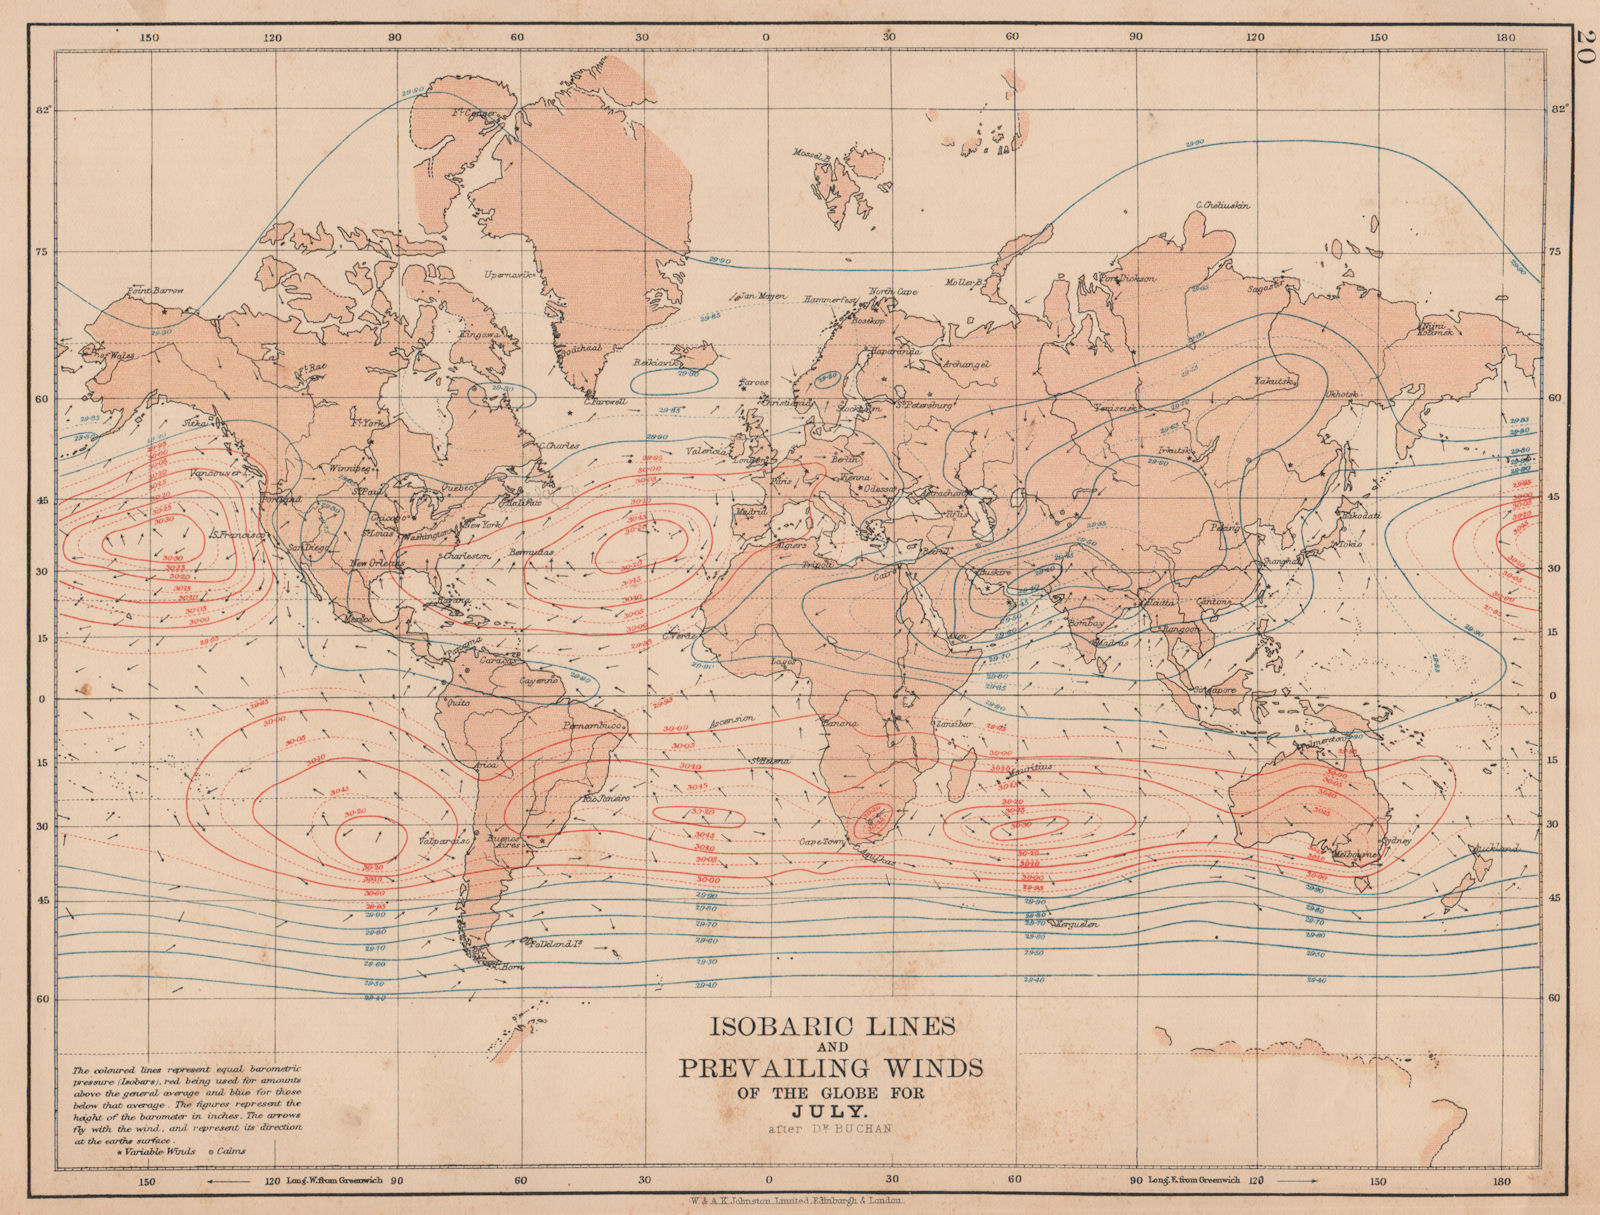 WORLD. Isobaric lines & Prevailing Winds of the Globe. July. JOHNSTON 1906 map